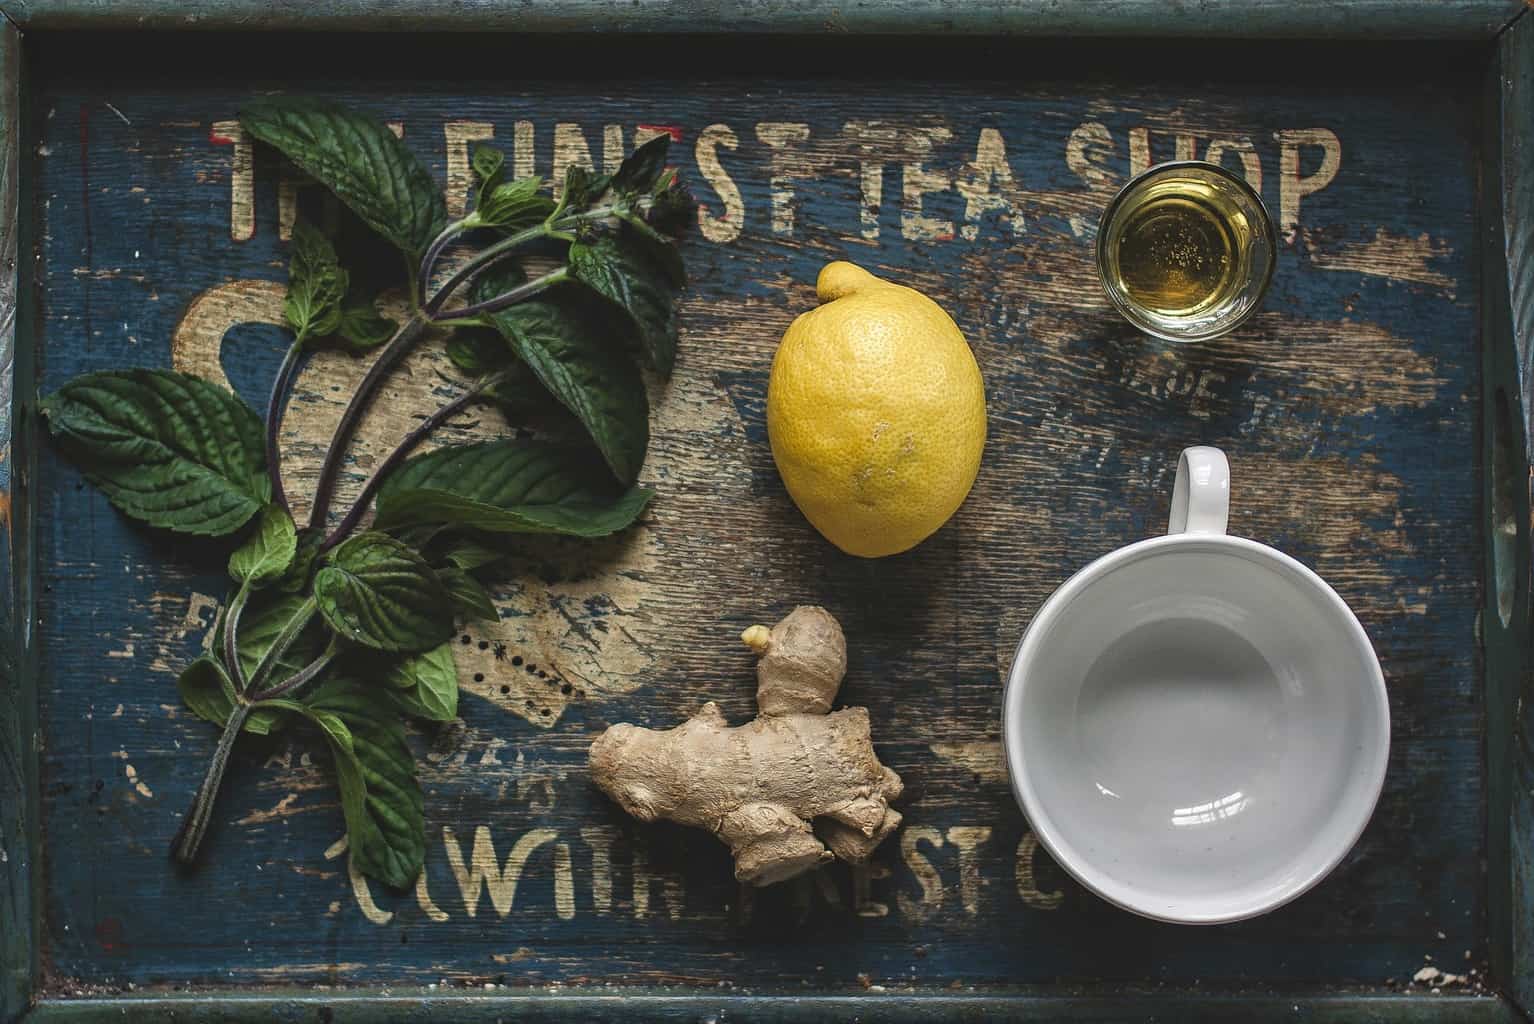 Lemon, ginger, water, and other ingredients on a tray.